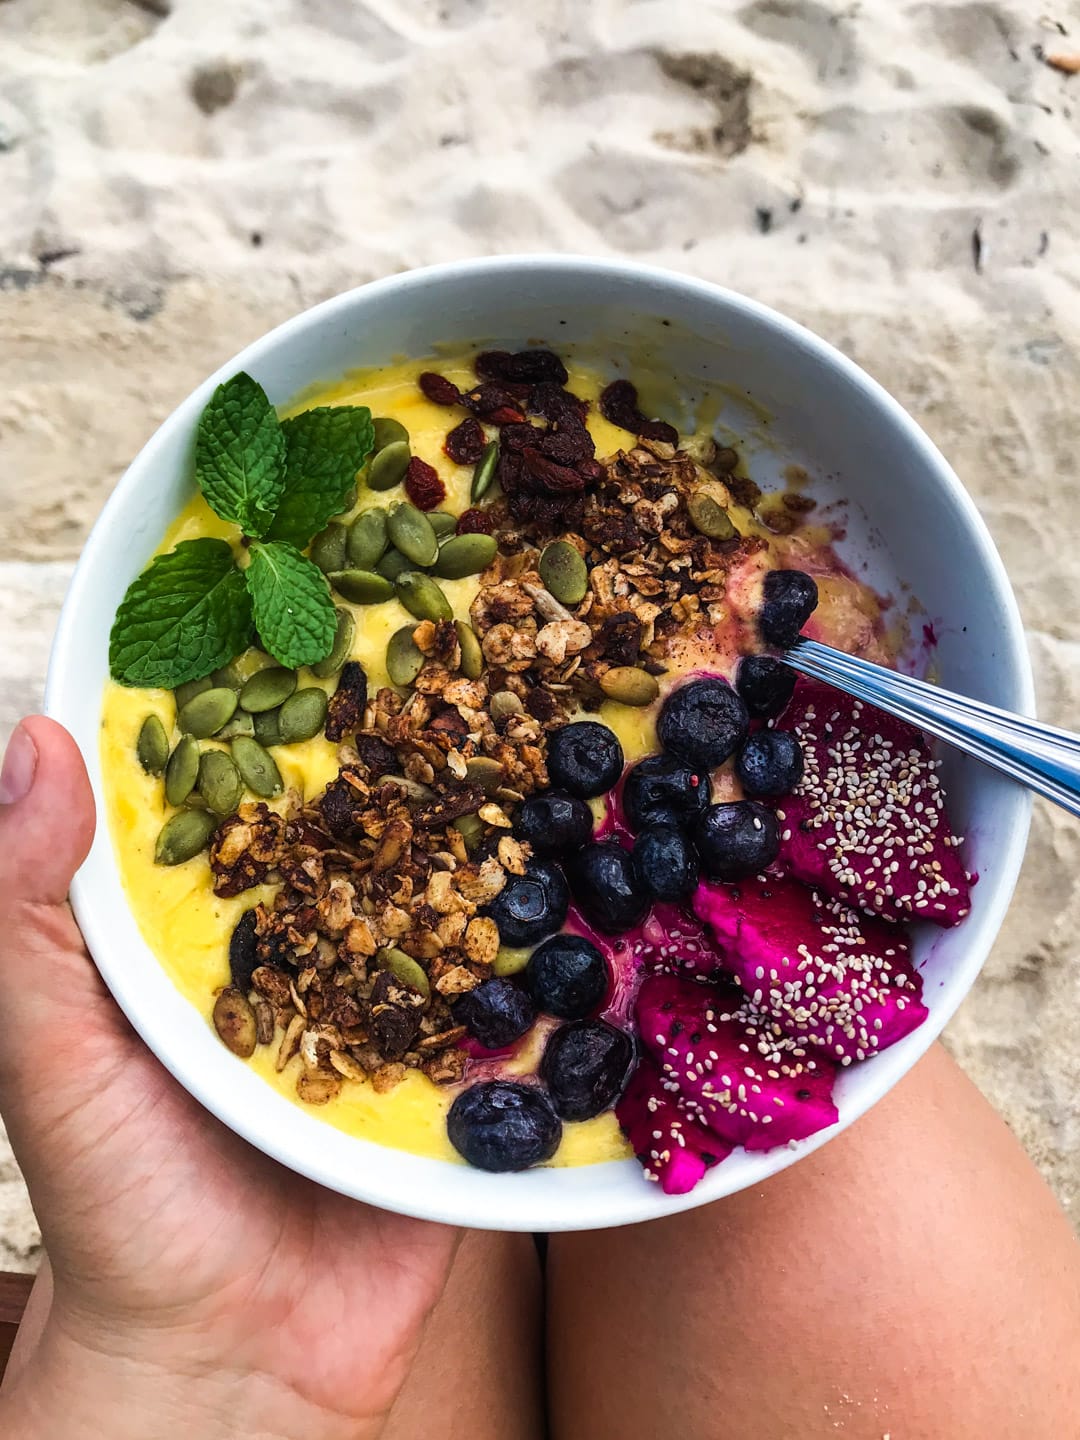 A yellow mango smoothie bowl topped with colorful tropical fruit from Ginger and Jamu cafe in Lembongan, Bali